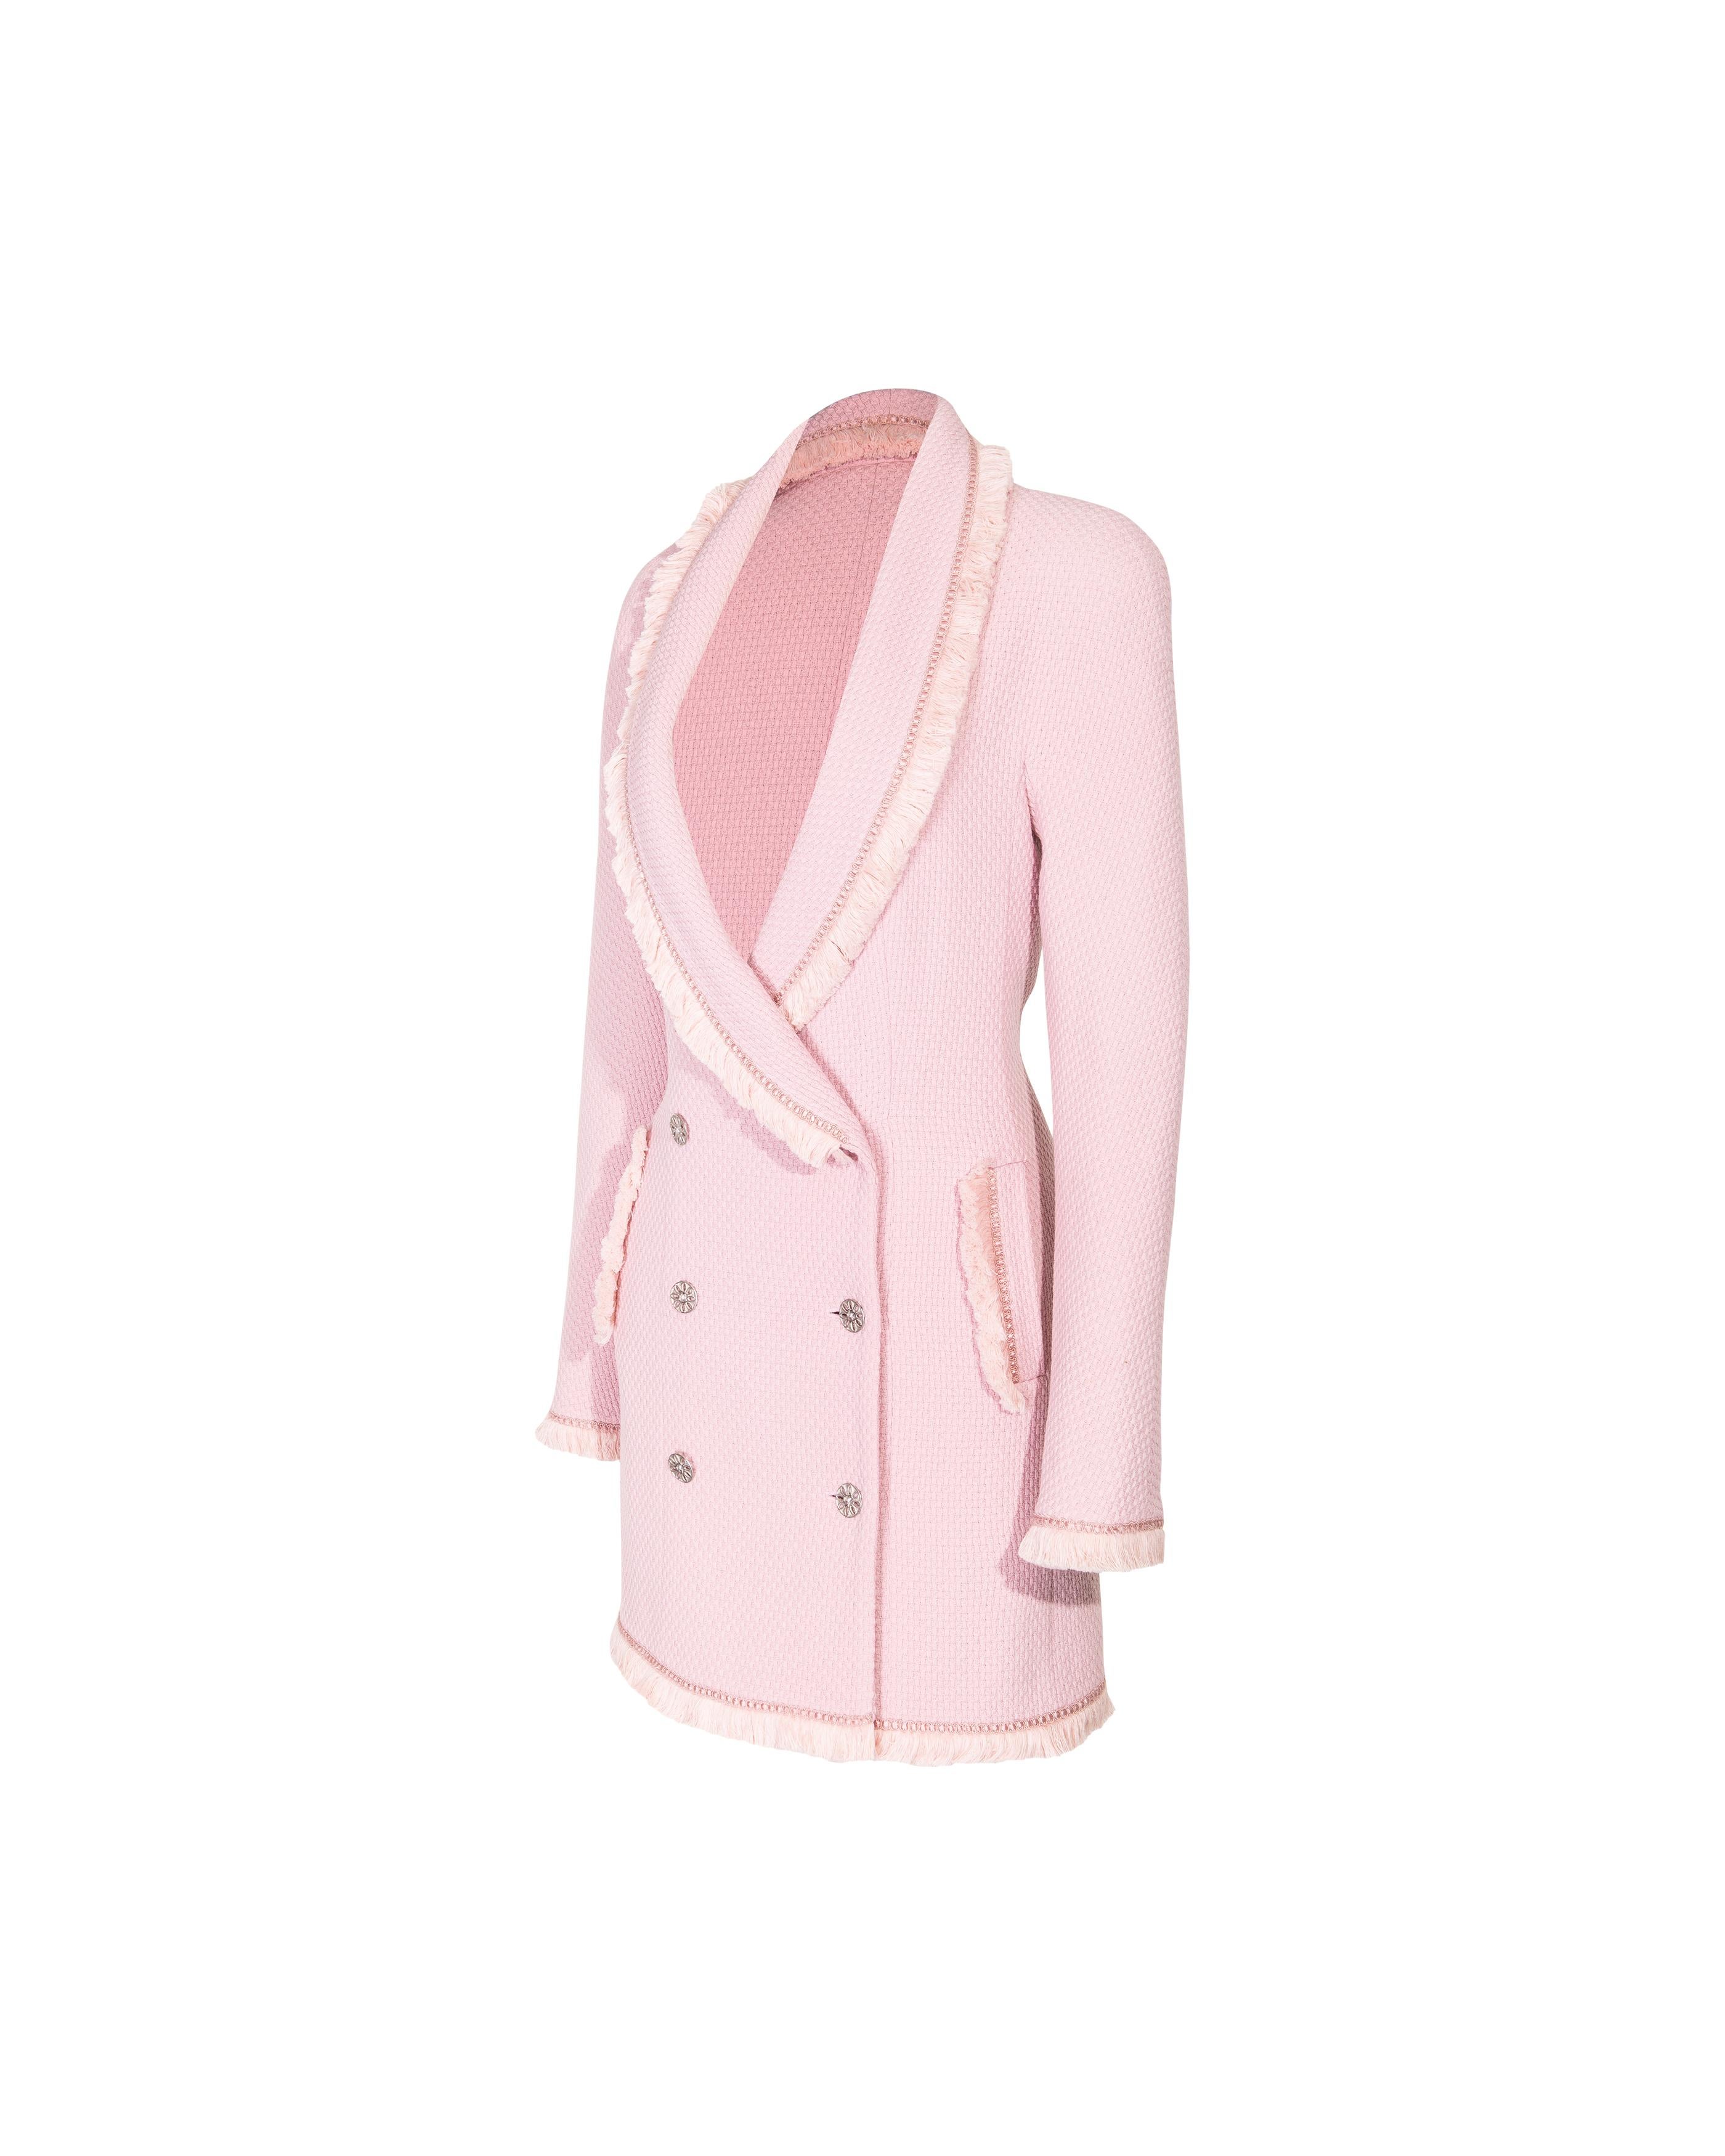 A/W 1997 Christian Dior by Galliano Pink Boucle Double-Breasted Blazer Dress In Excellent Condition In North Hollywood, CA